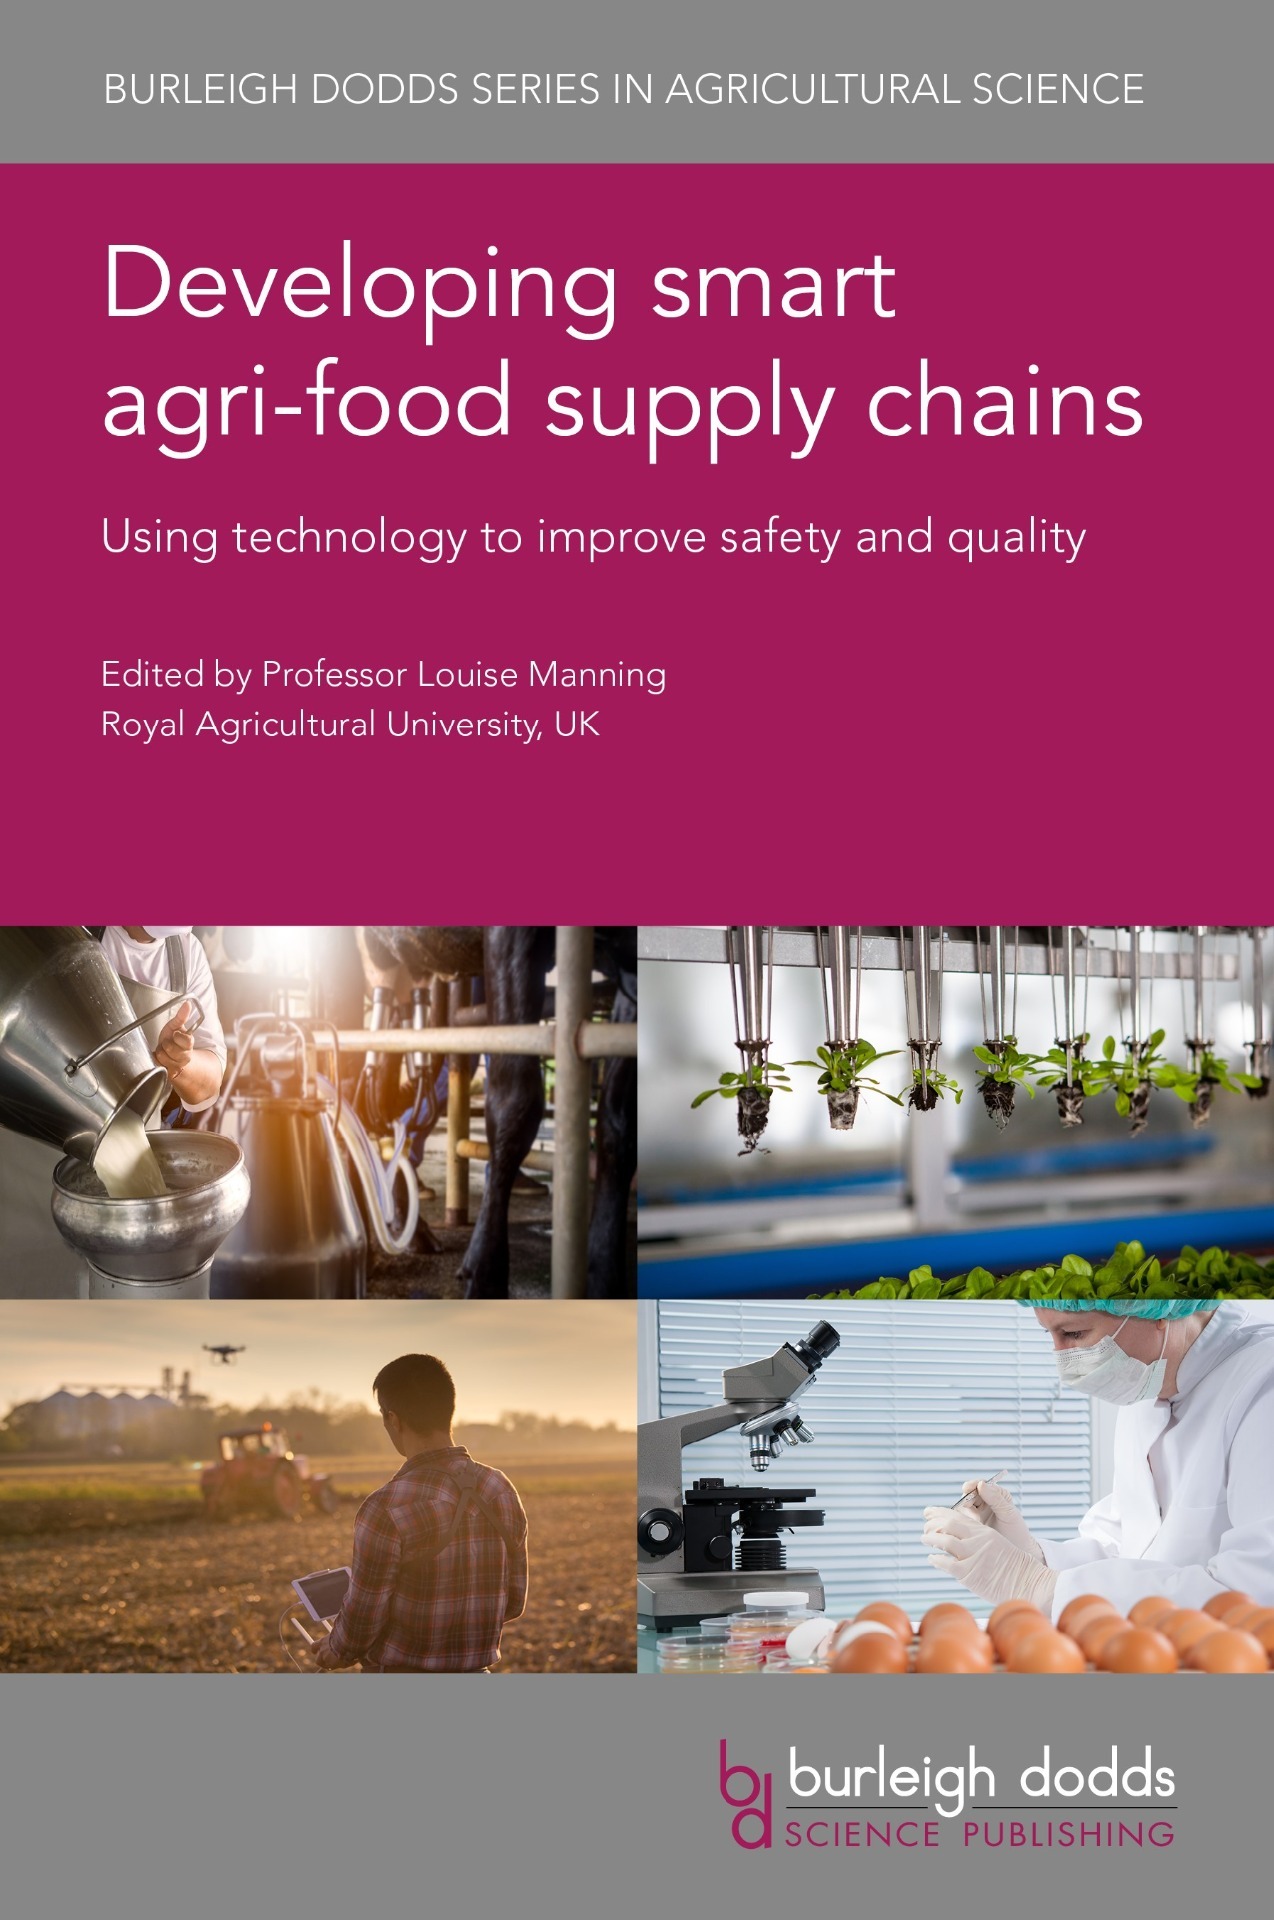 Developing smart agri-food supply chains